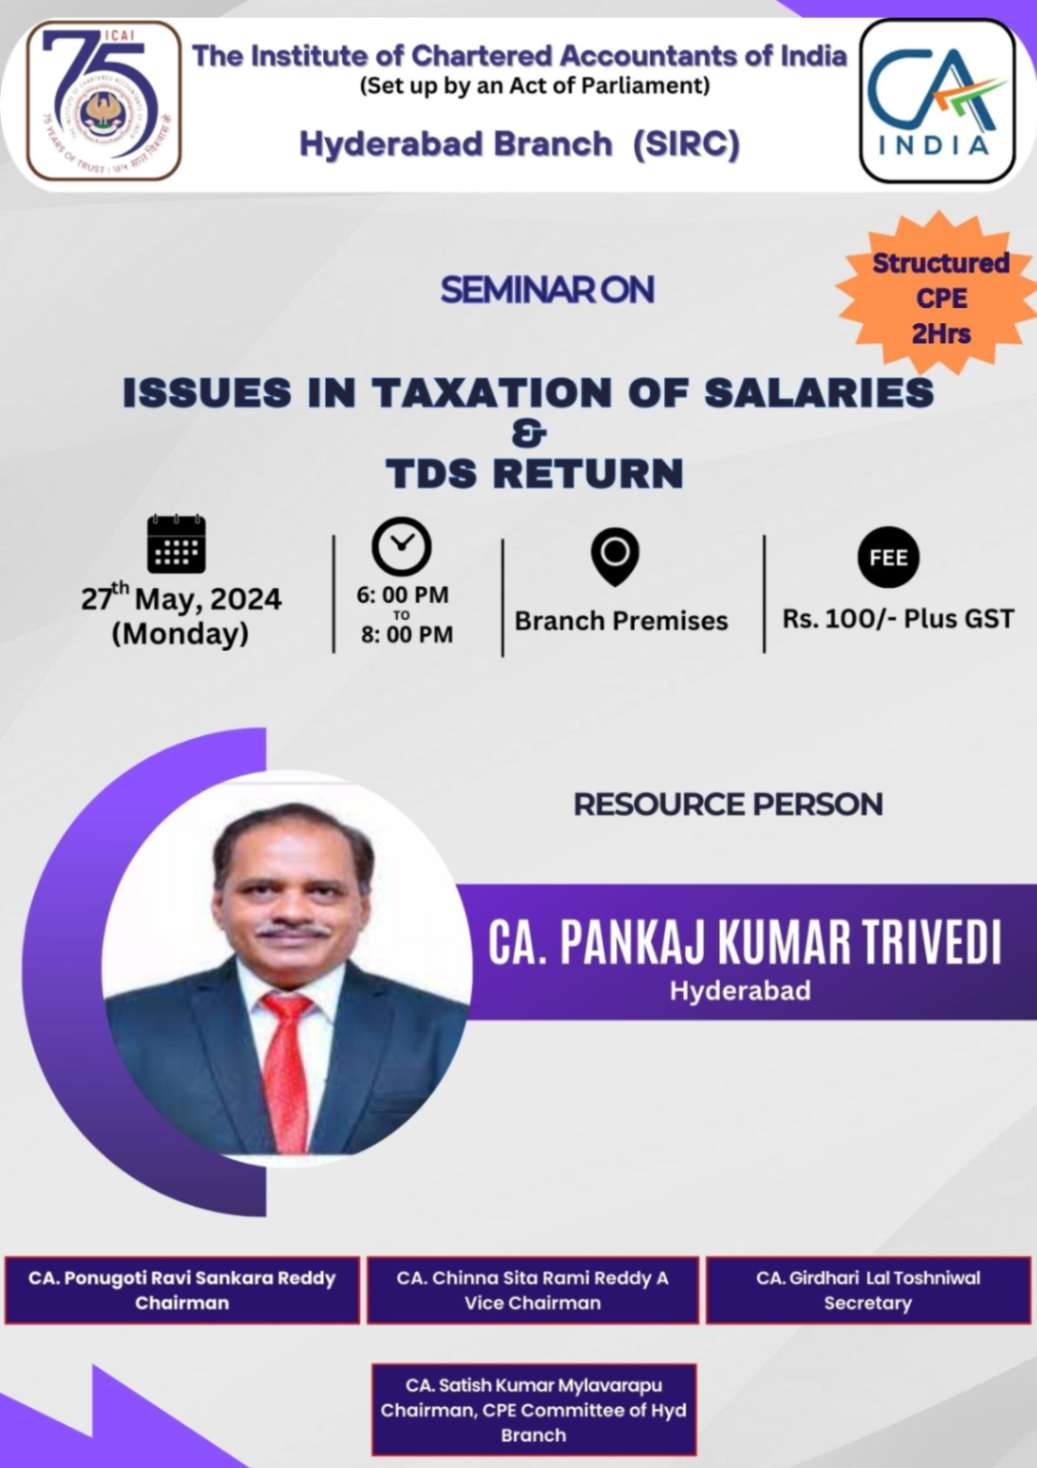 Seminar on Issues in Taxation of Salaries & TDS Return